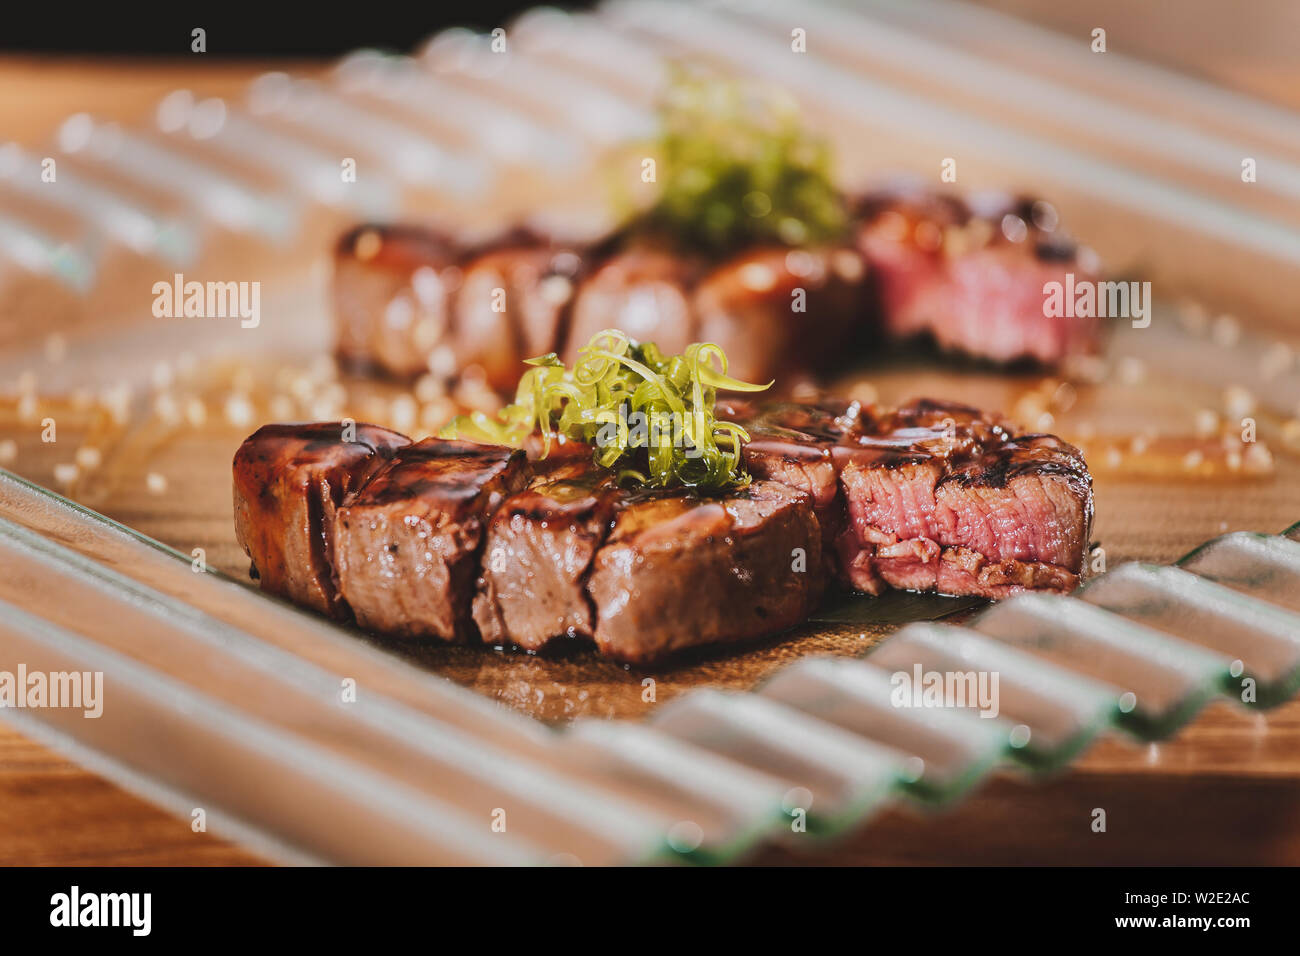 Grilled bbq steaks with herbs on wooden table Stock Photo